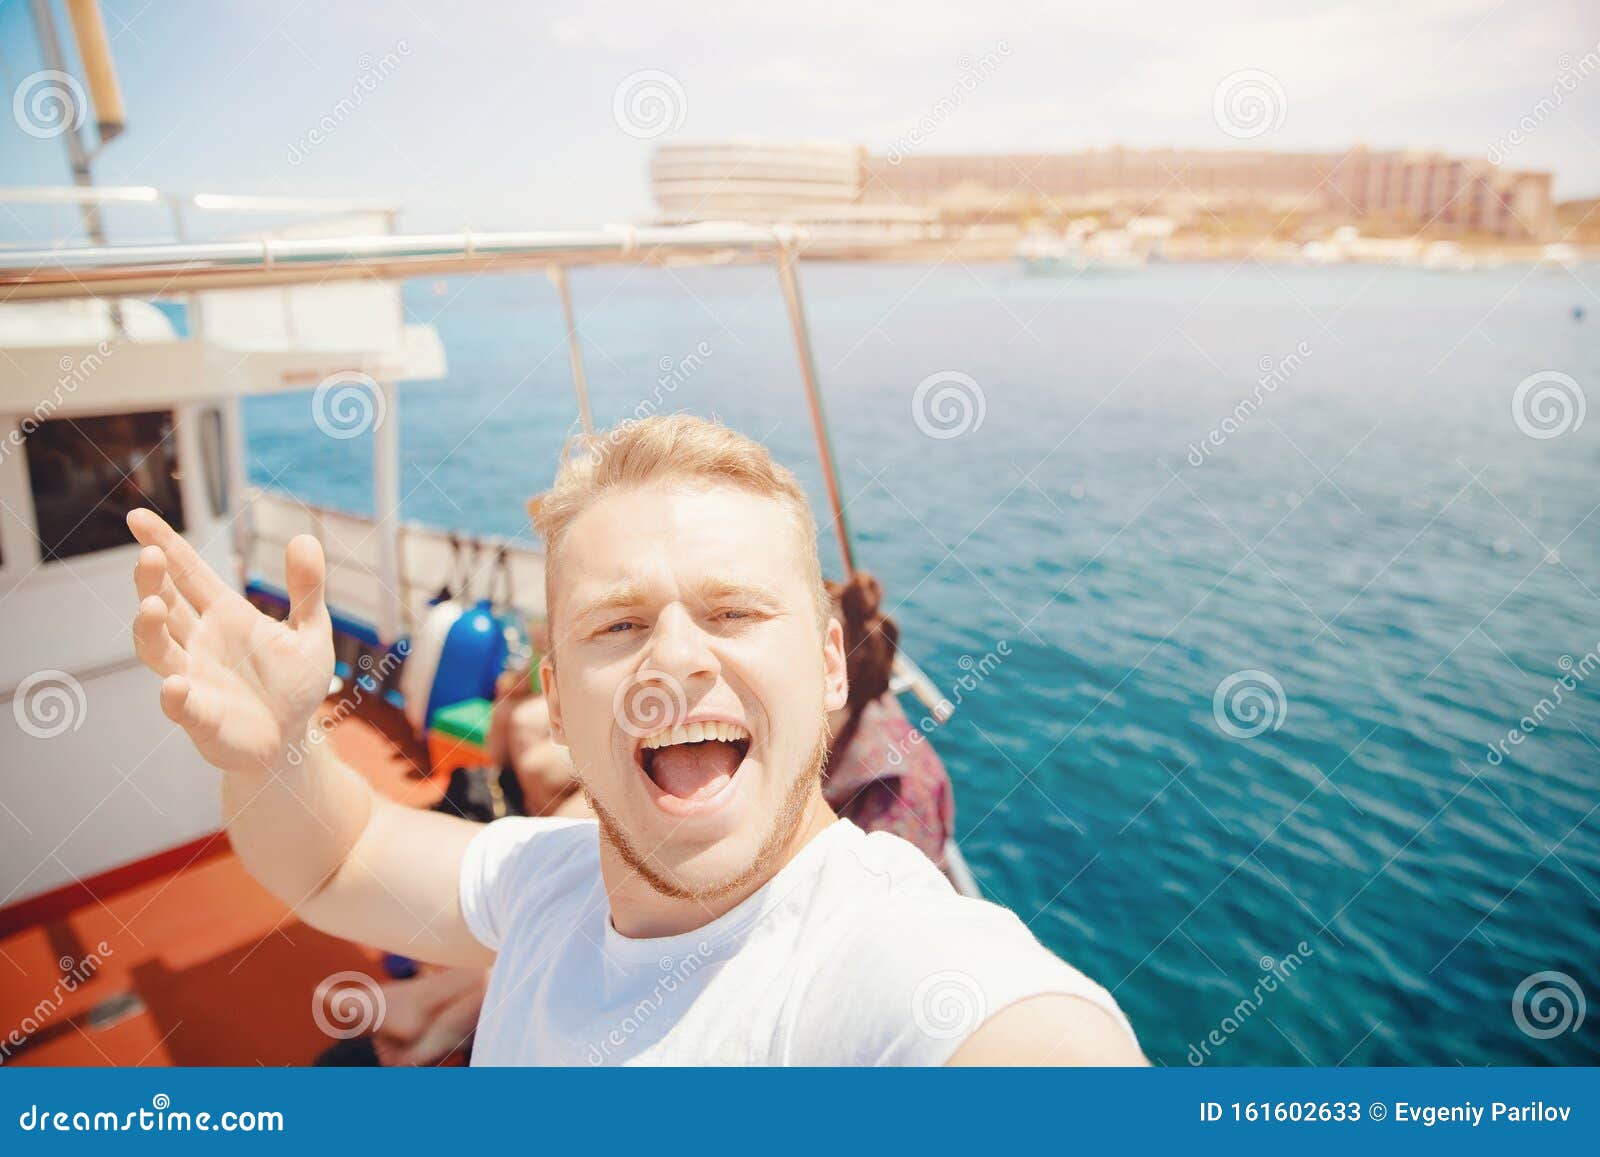 Male Tourist Takes Selfie Photo on Cruise Ship, Liner Travels through ...